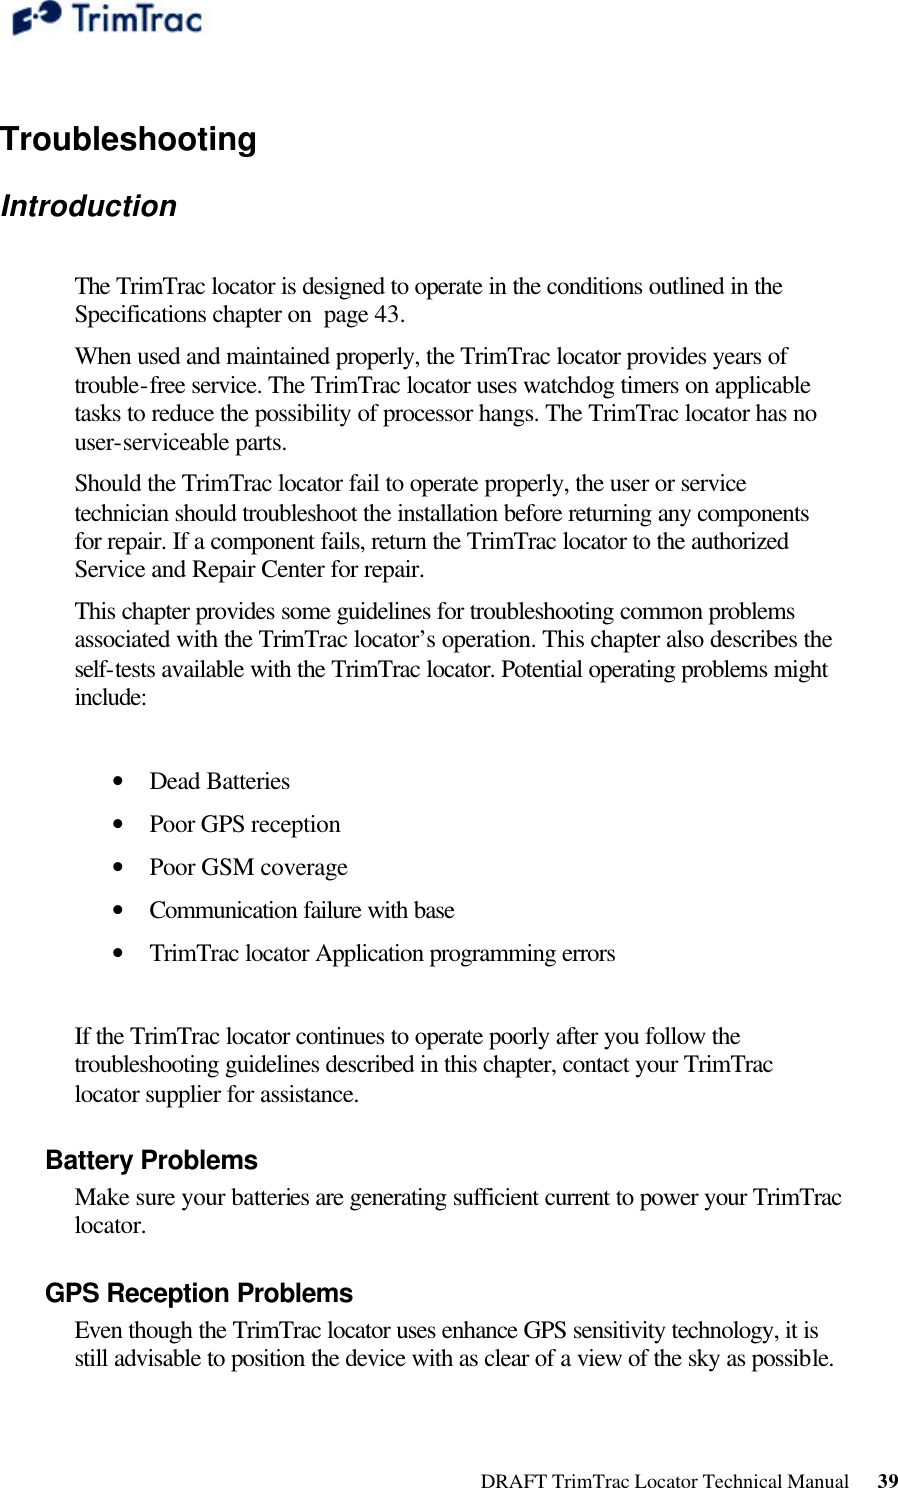  DRAFT TrimTrac Locator Technical Manual      39  Troubleshooting Introduction   The TrimTrac locator is designed to operate in the conditions outlined in the Specifications chapter on  page 43.  When used and maintained properly, the TrimTrac locator provides years of trouble-free service. The TrimTrac locator uses watchdog timers on applicable tasks to reduce the possibility of processor hangs. The TrimTrac locator has no user-serviceable parts. Should the TrimTrac locator fail to operate properly, the user or service technician should troubleshoot the installation before returning any components for repair. If a component fails, return the TrimTrac locator to the authorized Service and Repair Center for repair.  This chapter provides some guidelines for troubleshooting common problems associated with the TrimTrac locator’s operation. This chapter also describes the self-tests available with the TrimTrac locator. Potential operating problems might include:  • Dead Batteries  • Poor GPS reception  • Poor GSM coverage  • Communication failure with base  • TrimTrac locator Application programming errors   If the TrimTrac locator continues to operate poorly after you follow the troubleshooting guidelines described in this chapter, contact your TrimTrac locator supplier for assistance. Battery Problems  Make sure your batteries are generating sufficient current to power your TrimTrac locator. GPS Reception Problems  Even though the TrimTrac locator uses enhance GPS sensitivity technology, it is still advisable to position the device with as clear of a view of the sky as possible.  